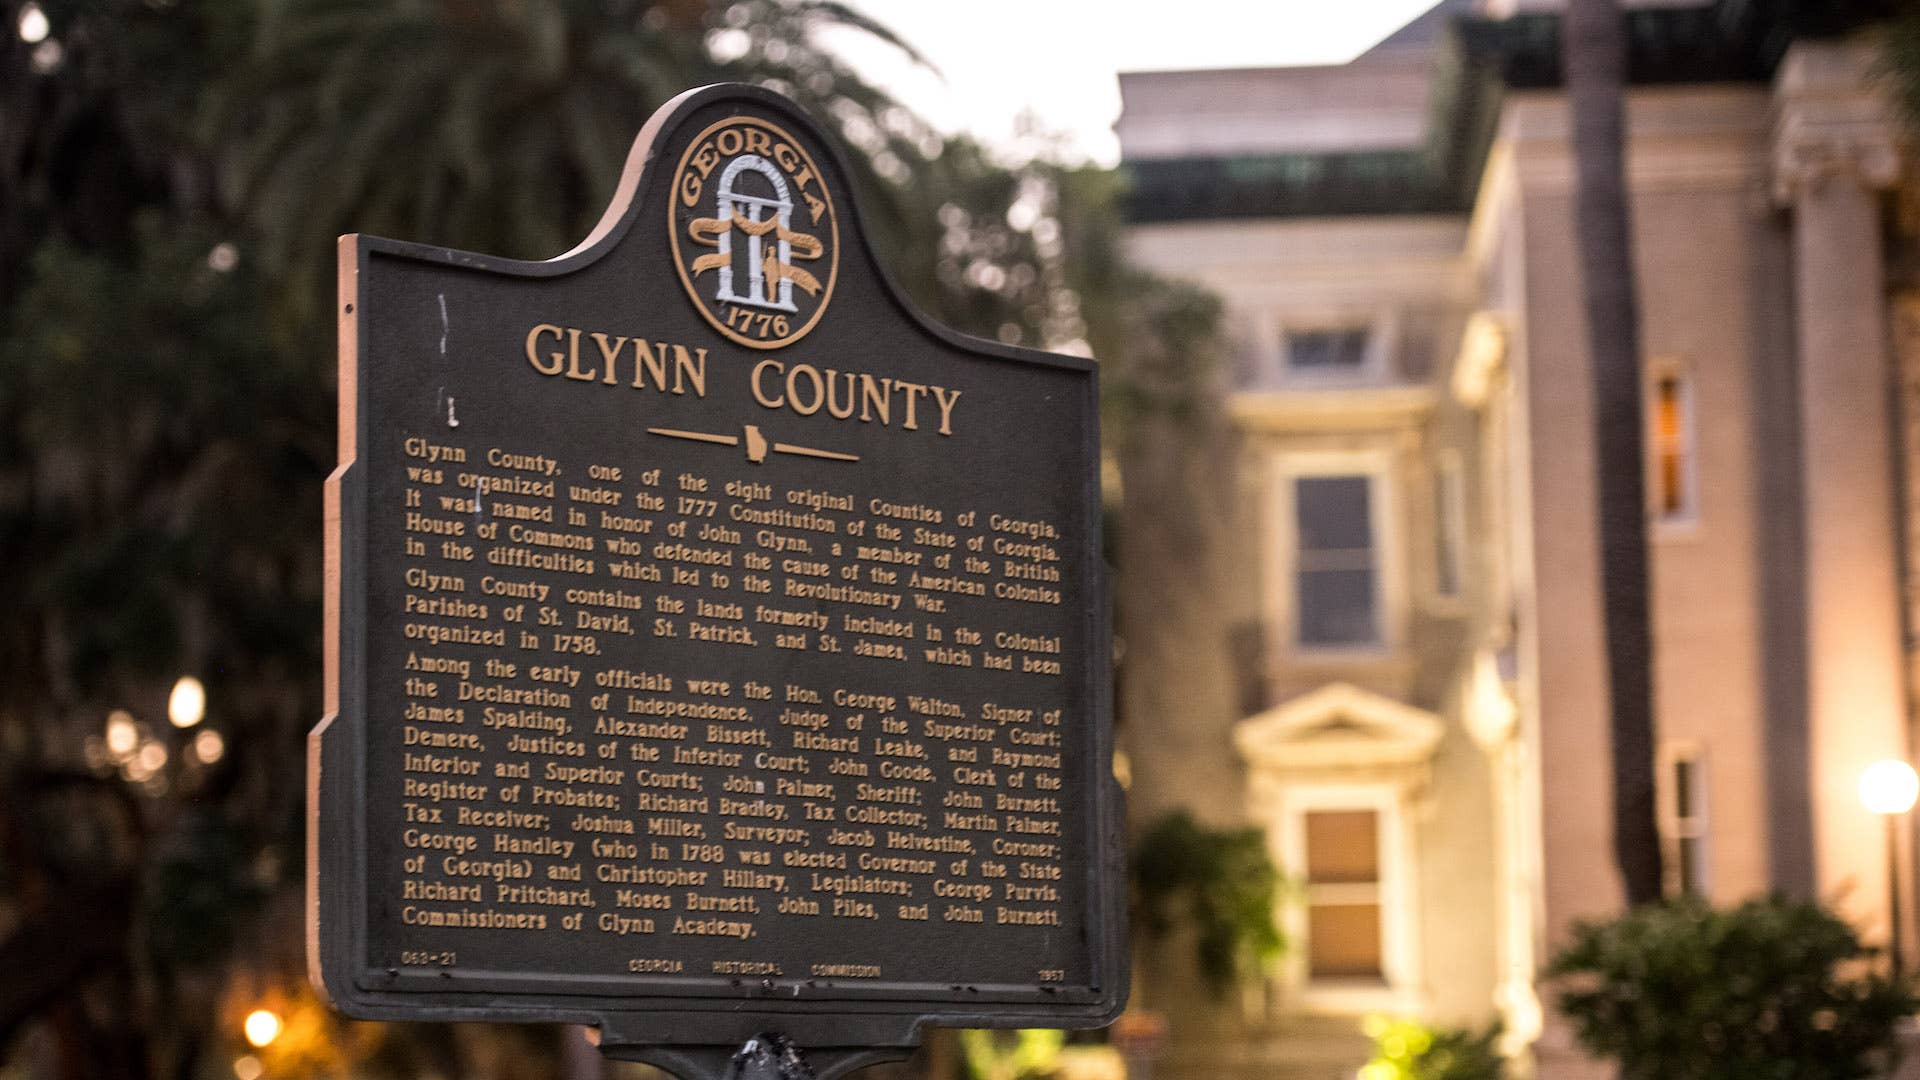 A marker stands in front of the historic Glynn County courthouse.